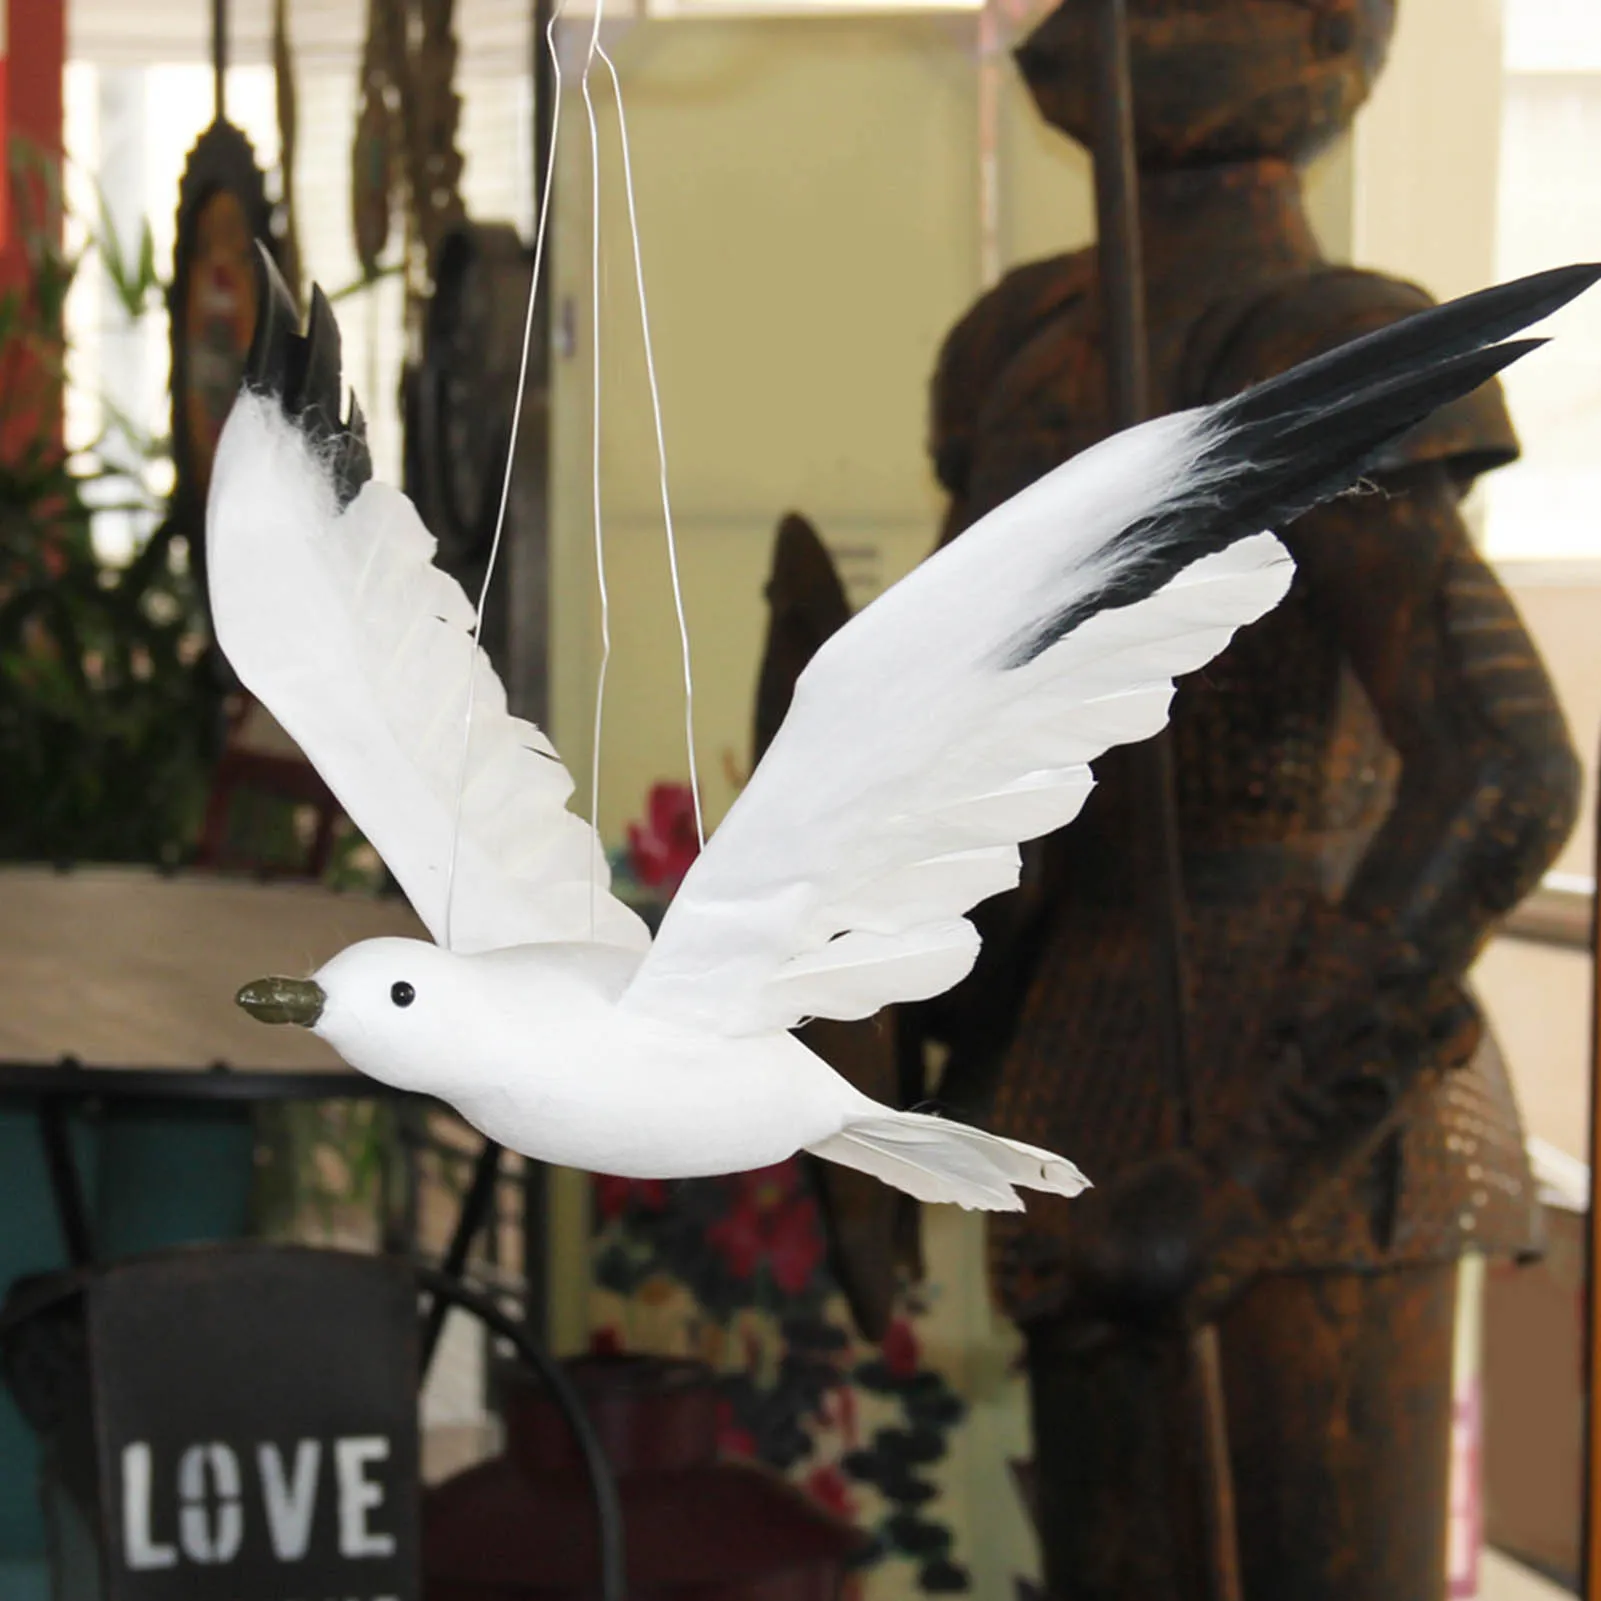 

Artificial Flying Faux Feather Bird Hanging Decorations Dreamcatcher Colgantes Wind Chimes Carillon Oyuncak Duck Decoy